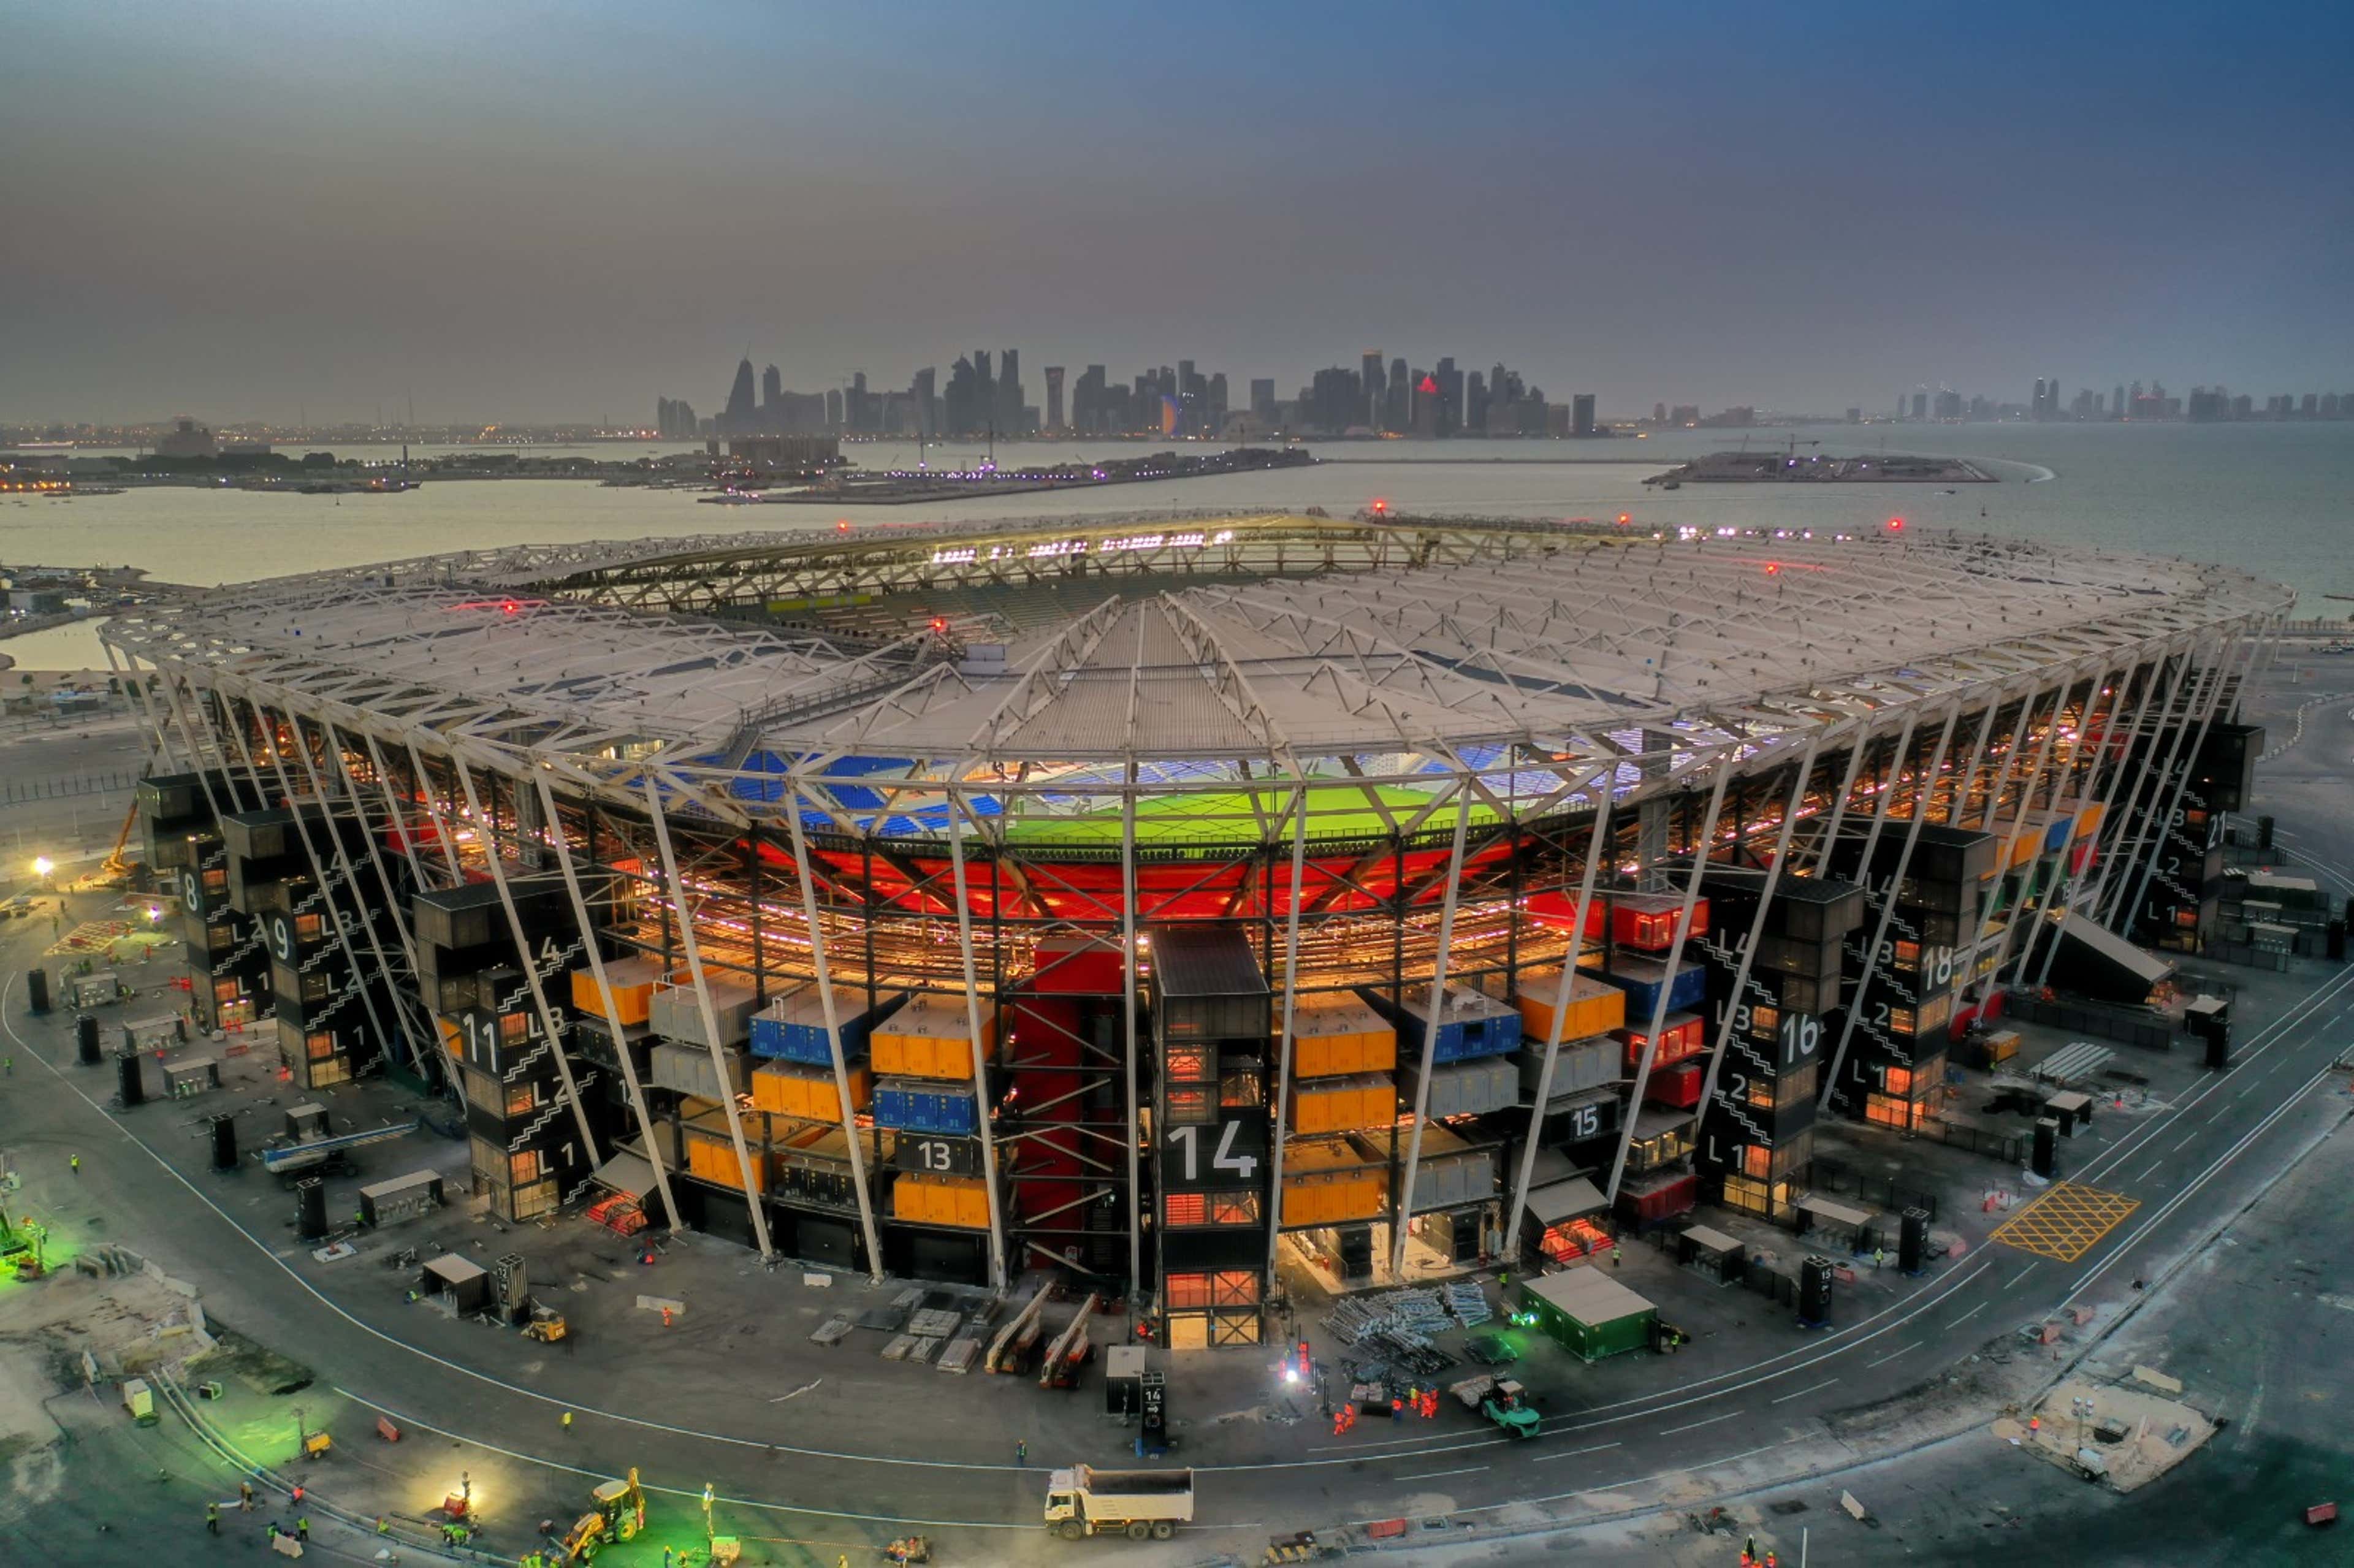 Stadium 974 was built using shipping containers for Qatar 2022